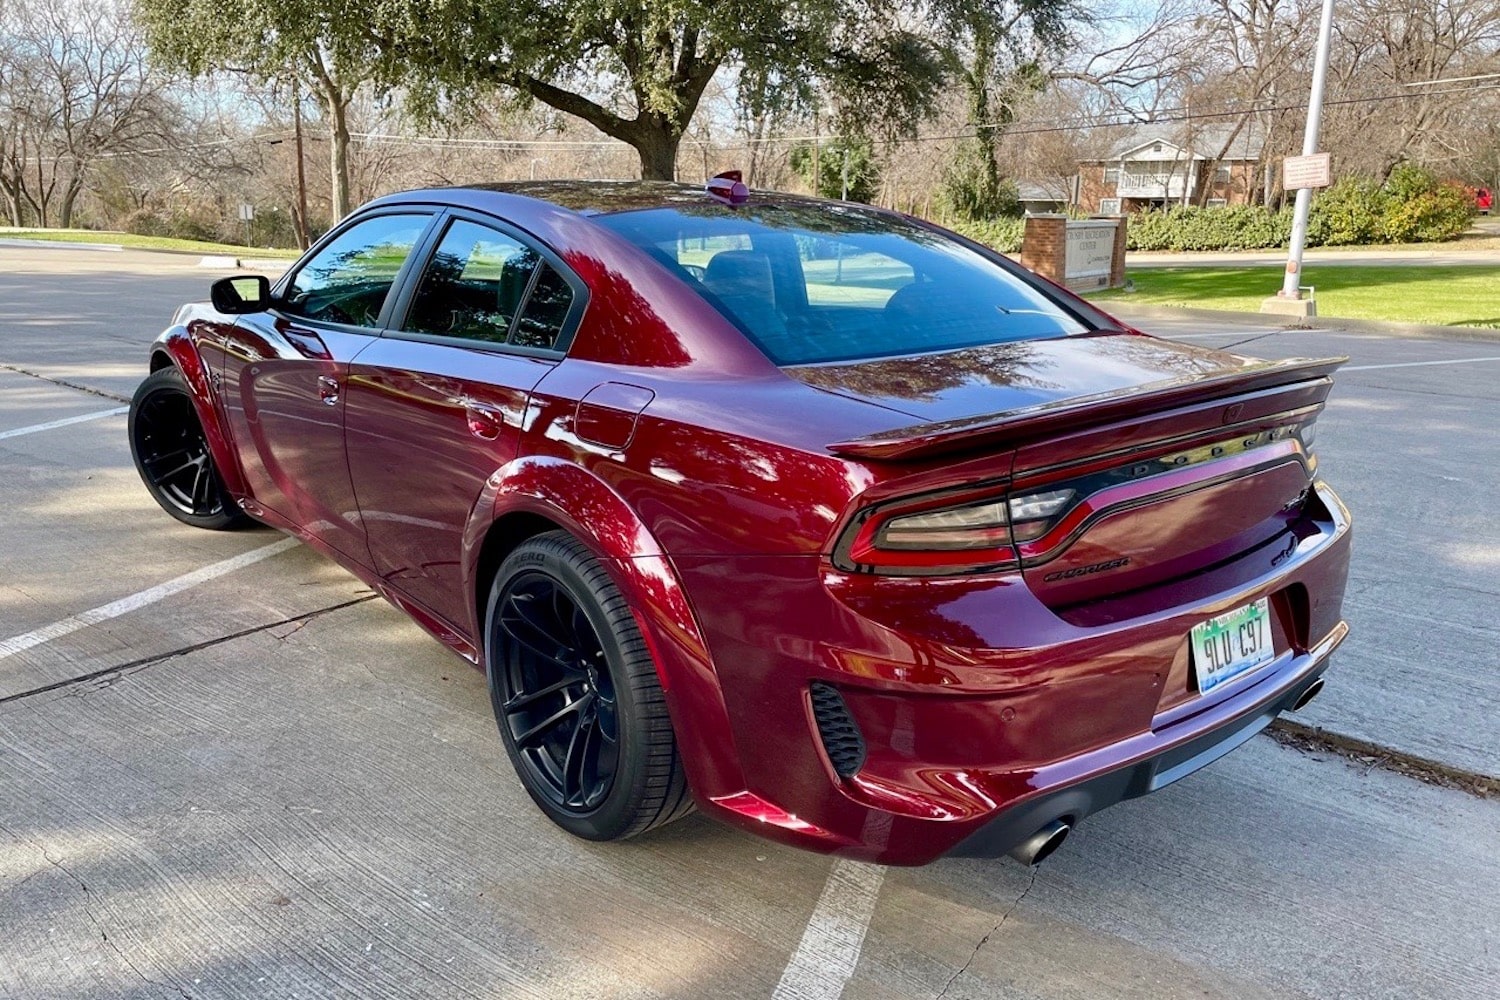 2021 Dodge Charger Hellcat exterior